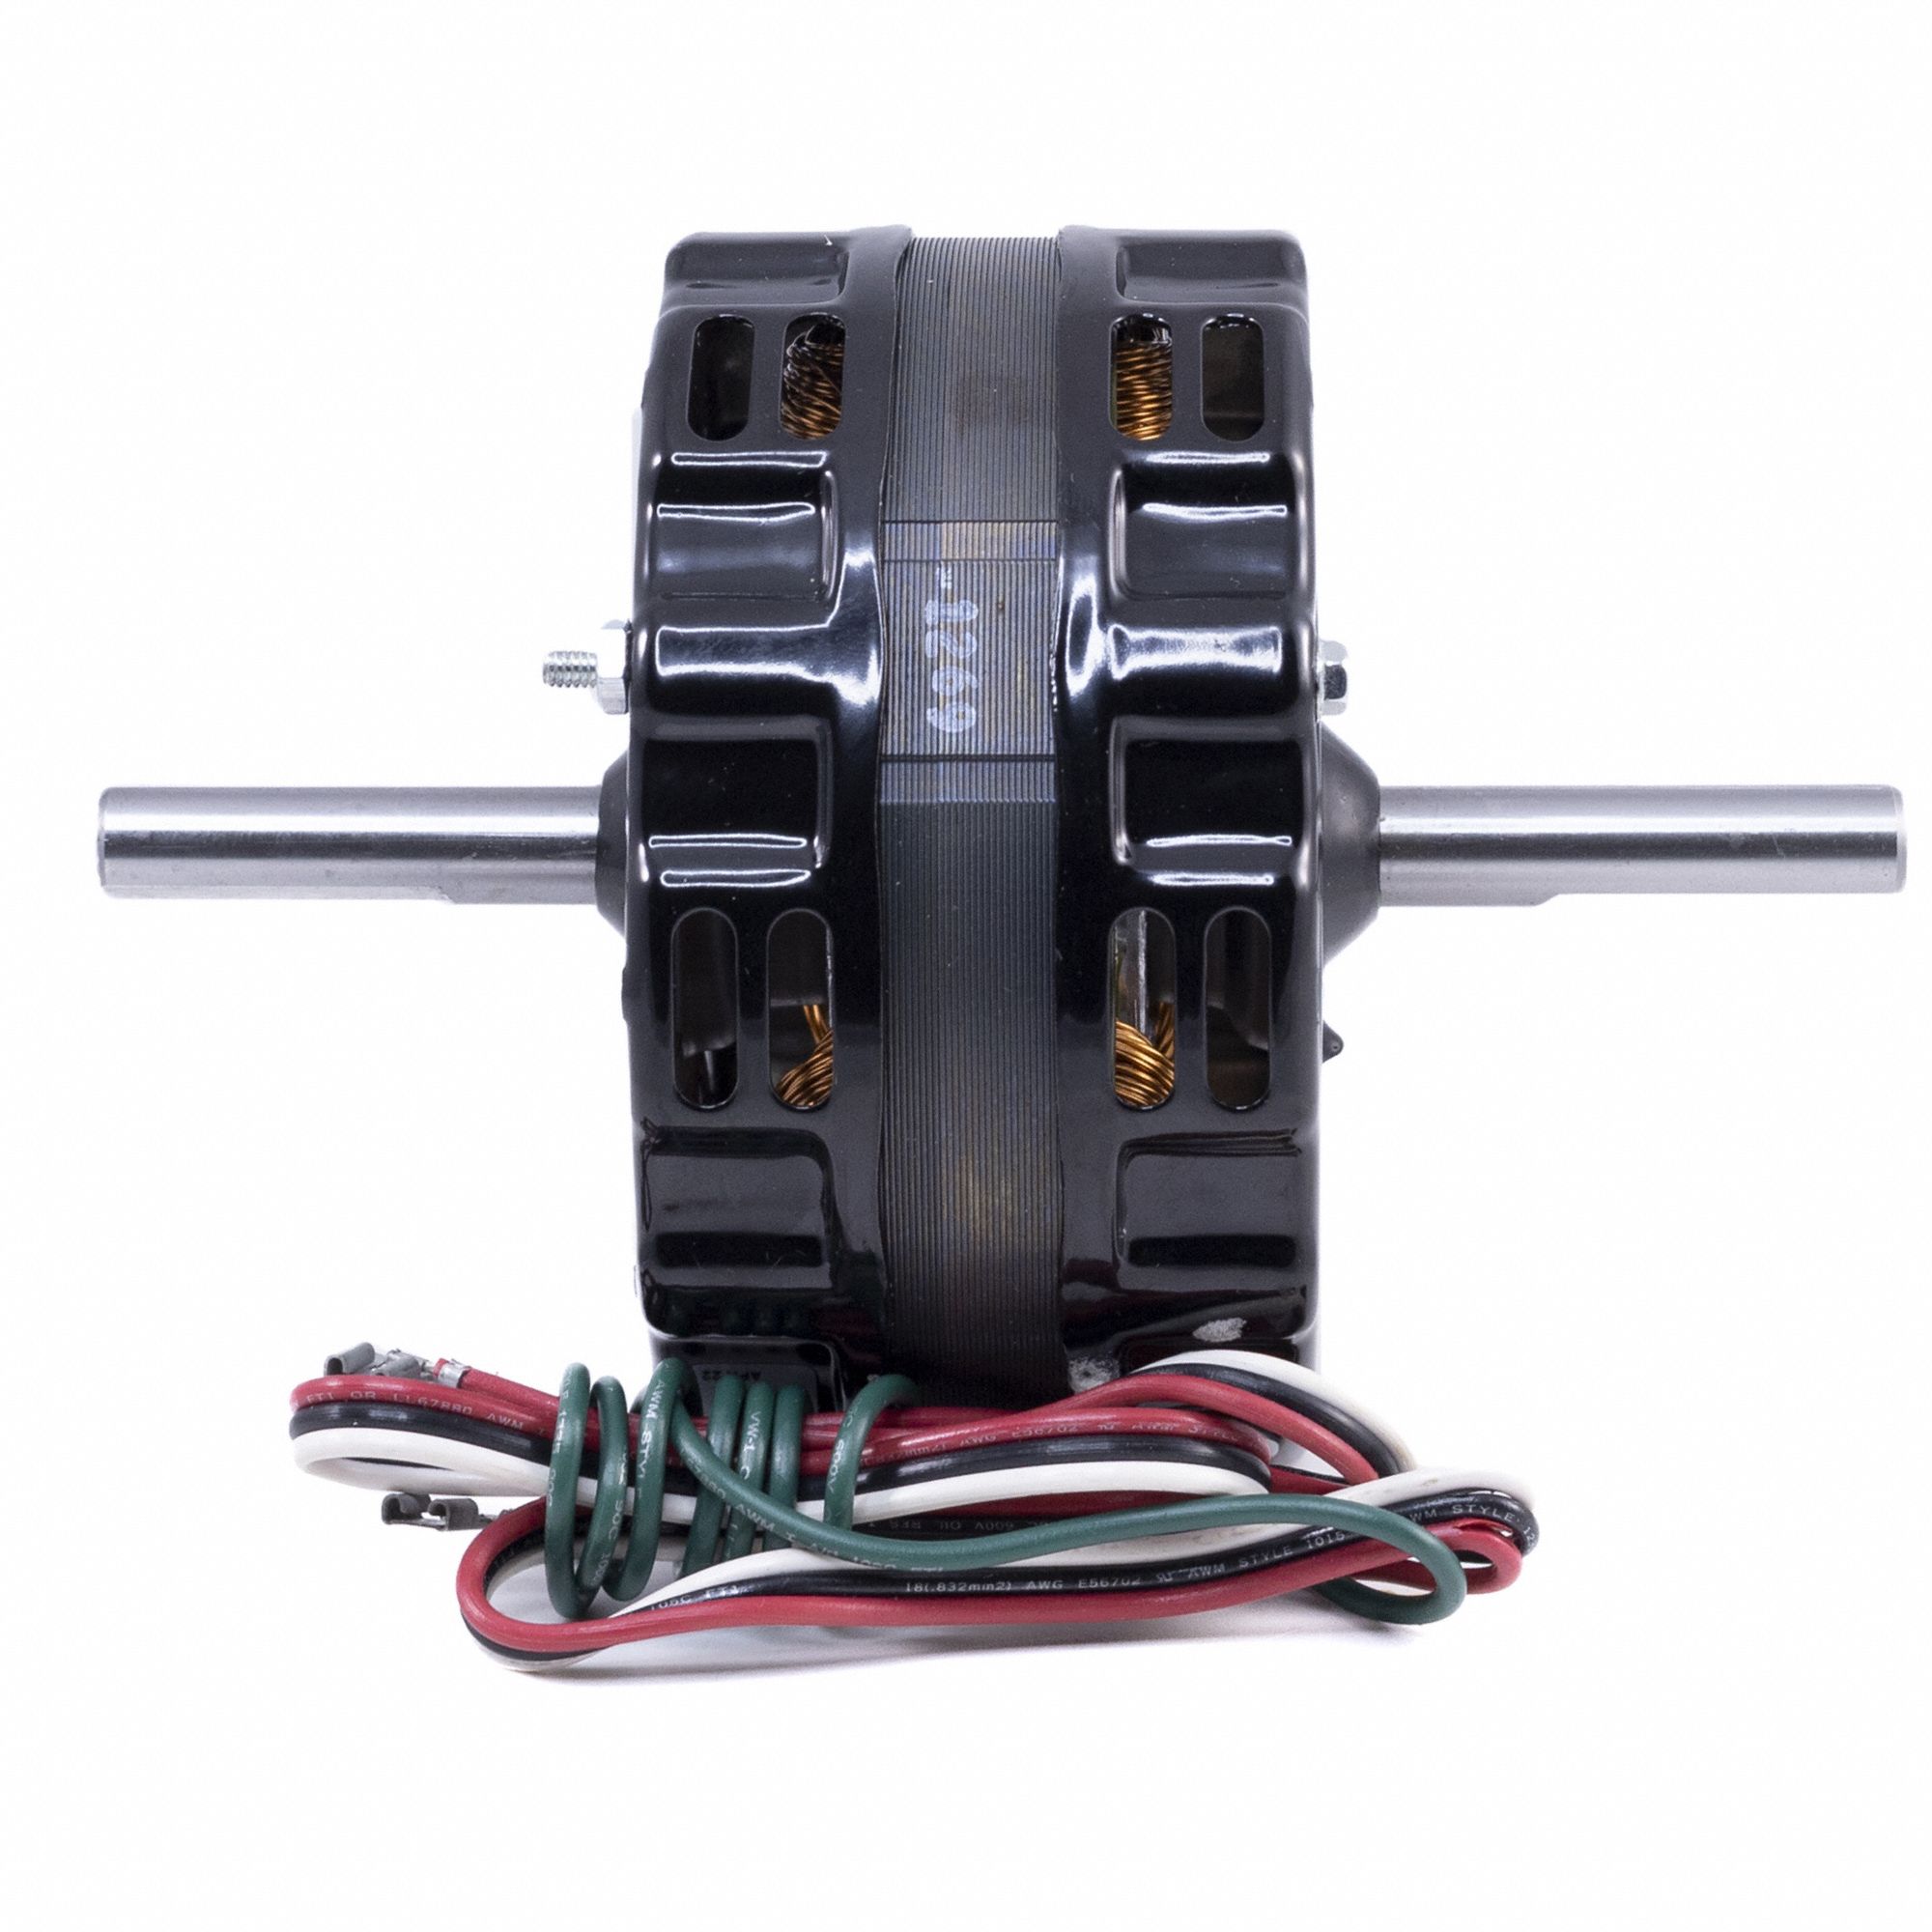 Motor,1/8 HP: For 2YAD8, For MMB10/N28W, Fits Essick Air/Mastercool Brand